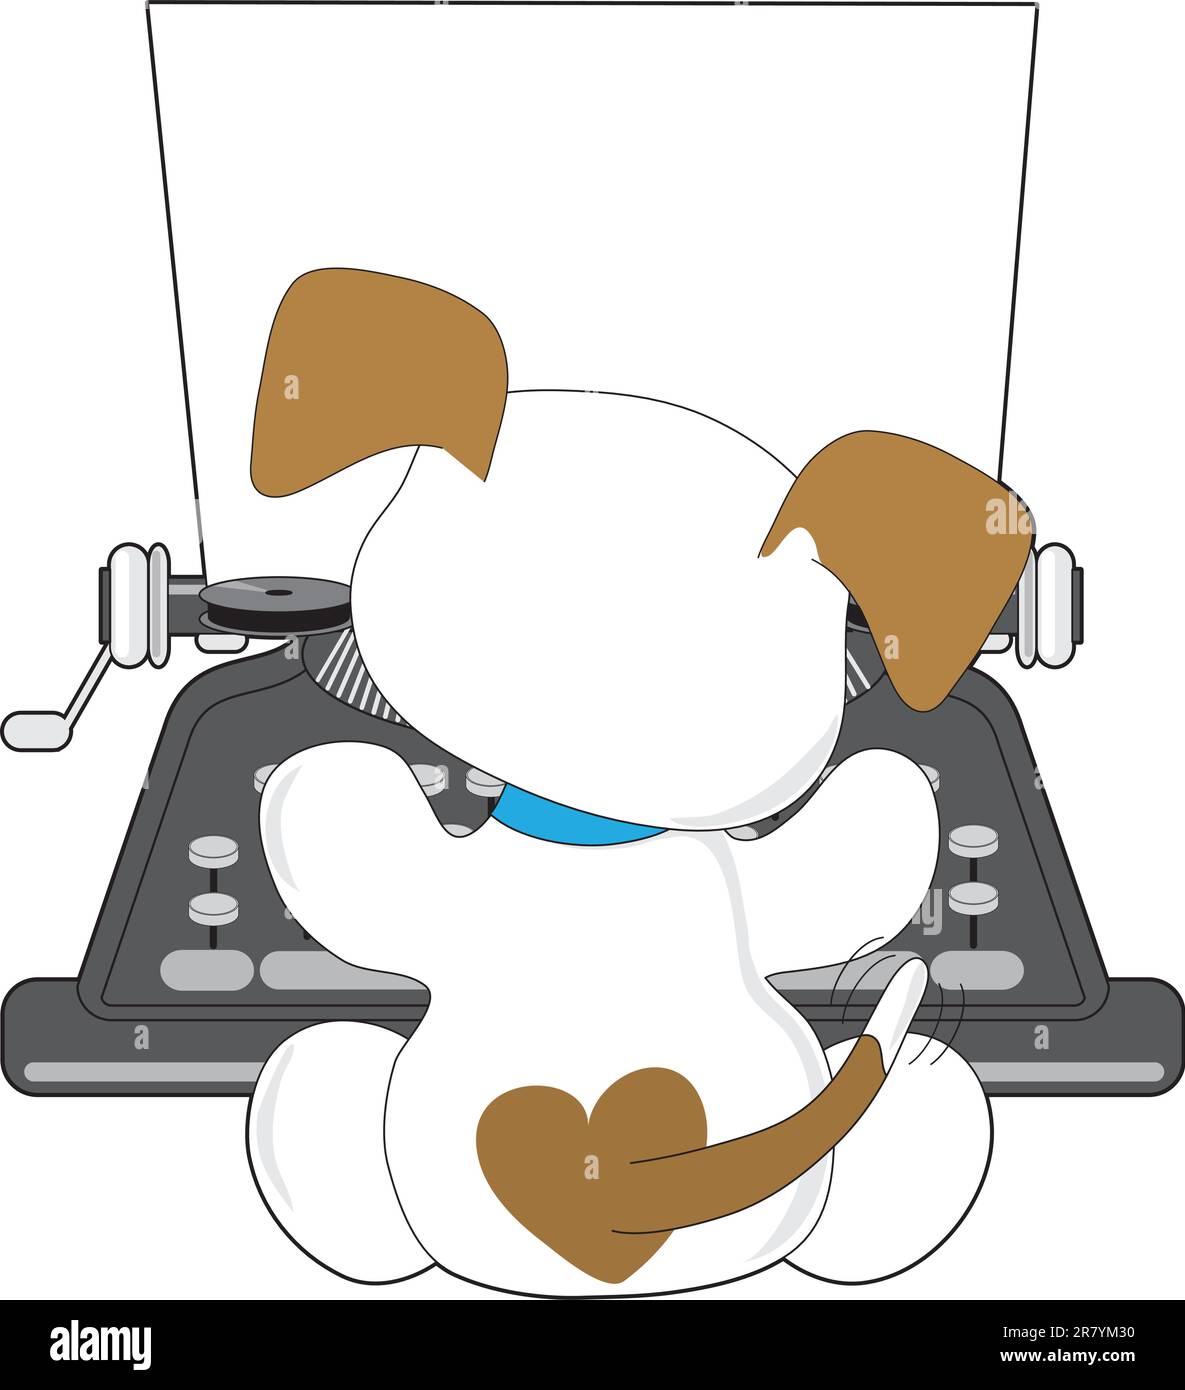 A small puppy with a wagging tail, is busy typing away on an old style typewriter. Stock Vector